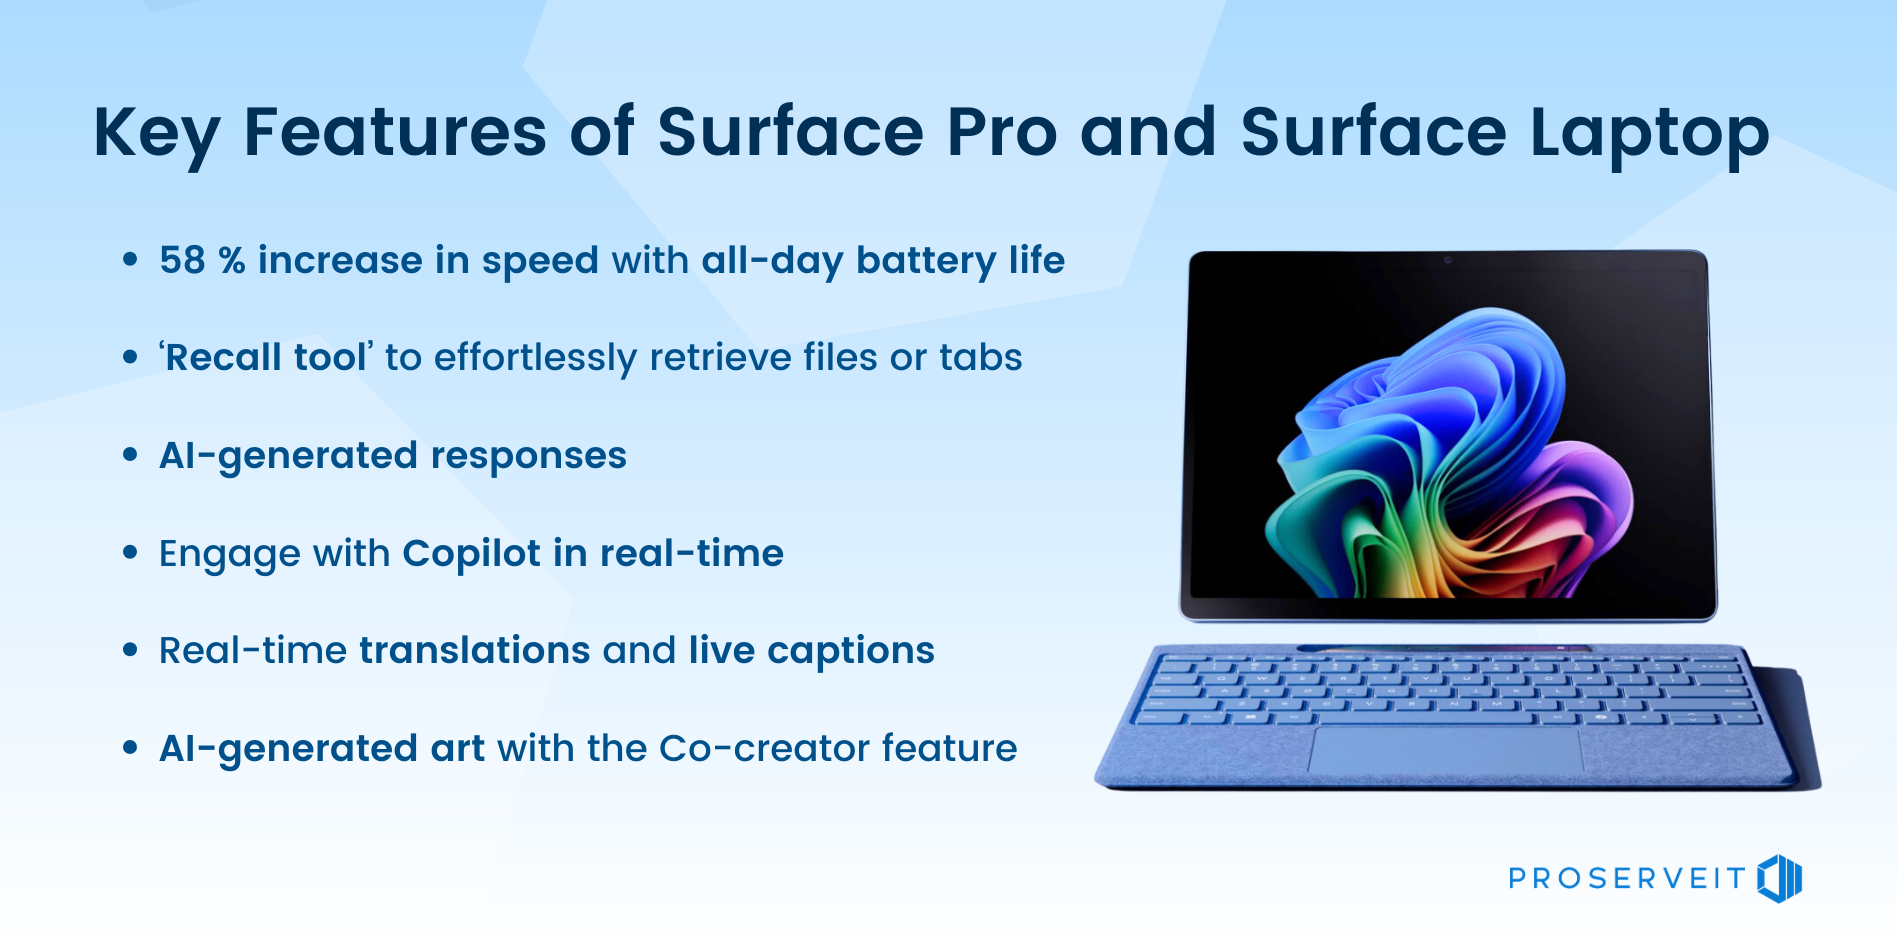 Key Features of Surface Pro and Surface Laptop